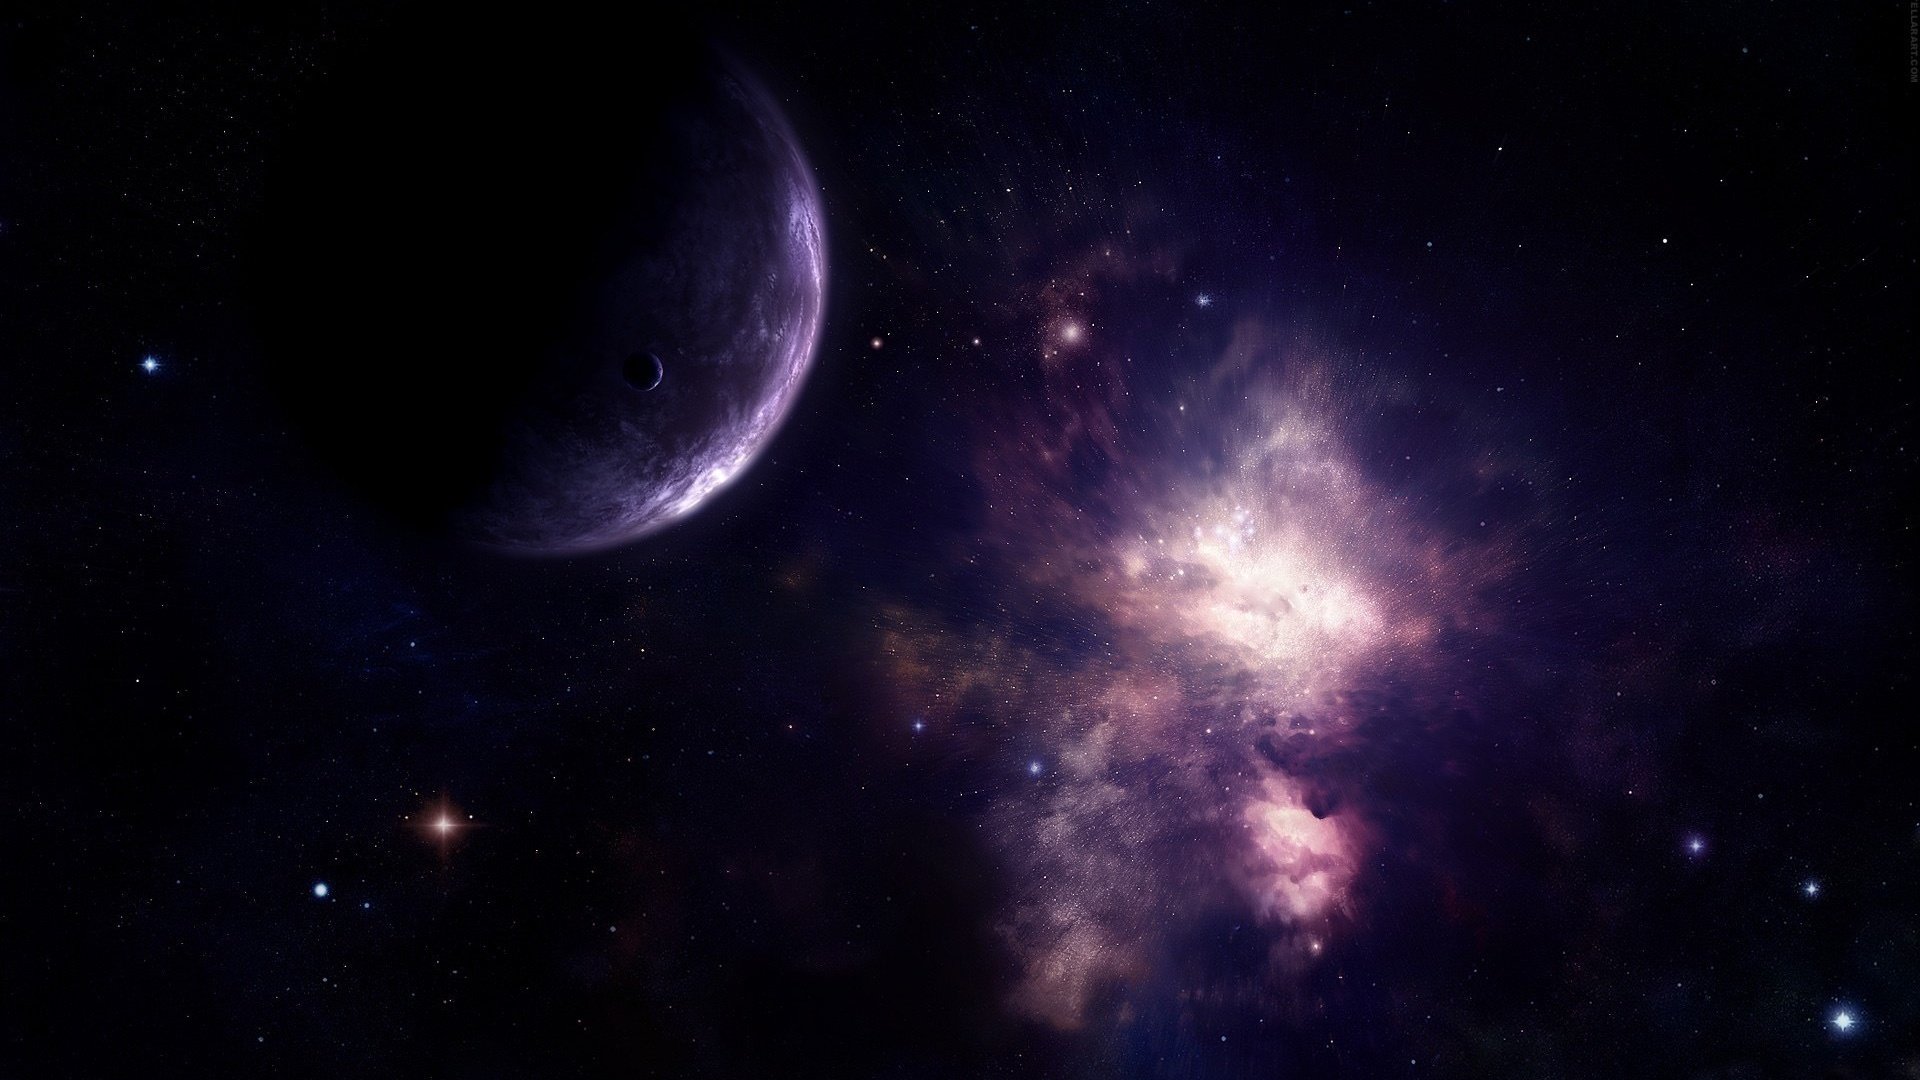 space, Universe, Galaxy, Cosmos, Astronomy, Planet, Star, Colors, Colorful, Sky, Nature, Planets, Stars, Galaxies Wallpaper